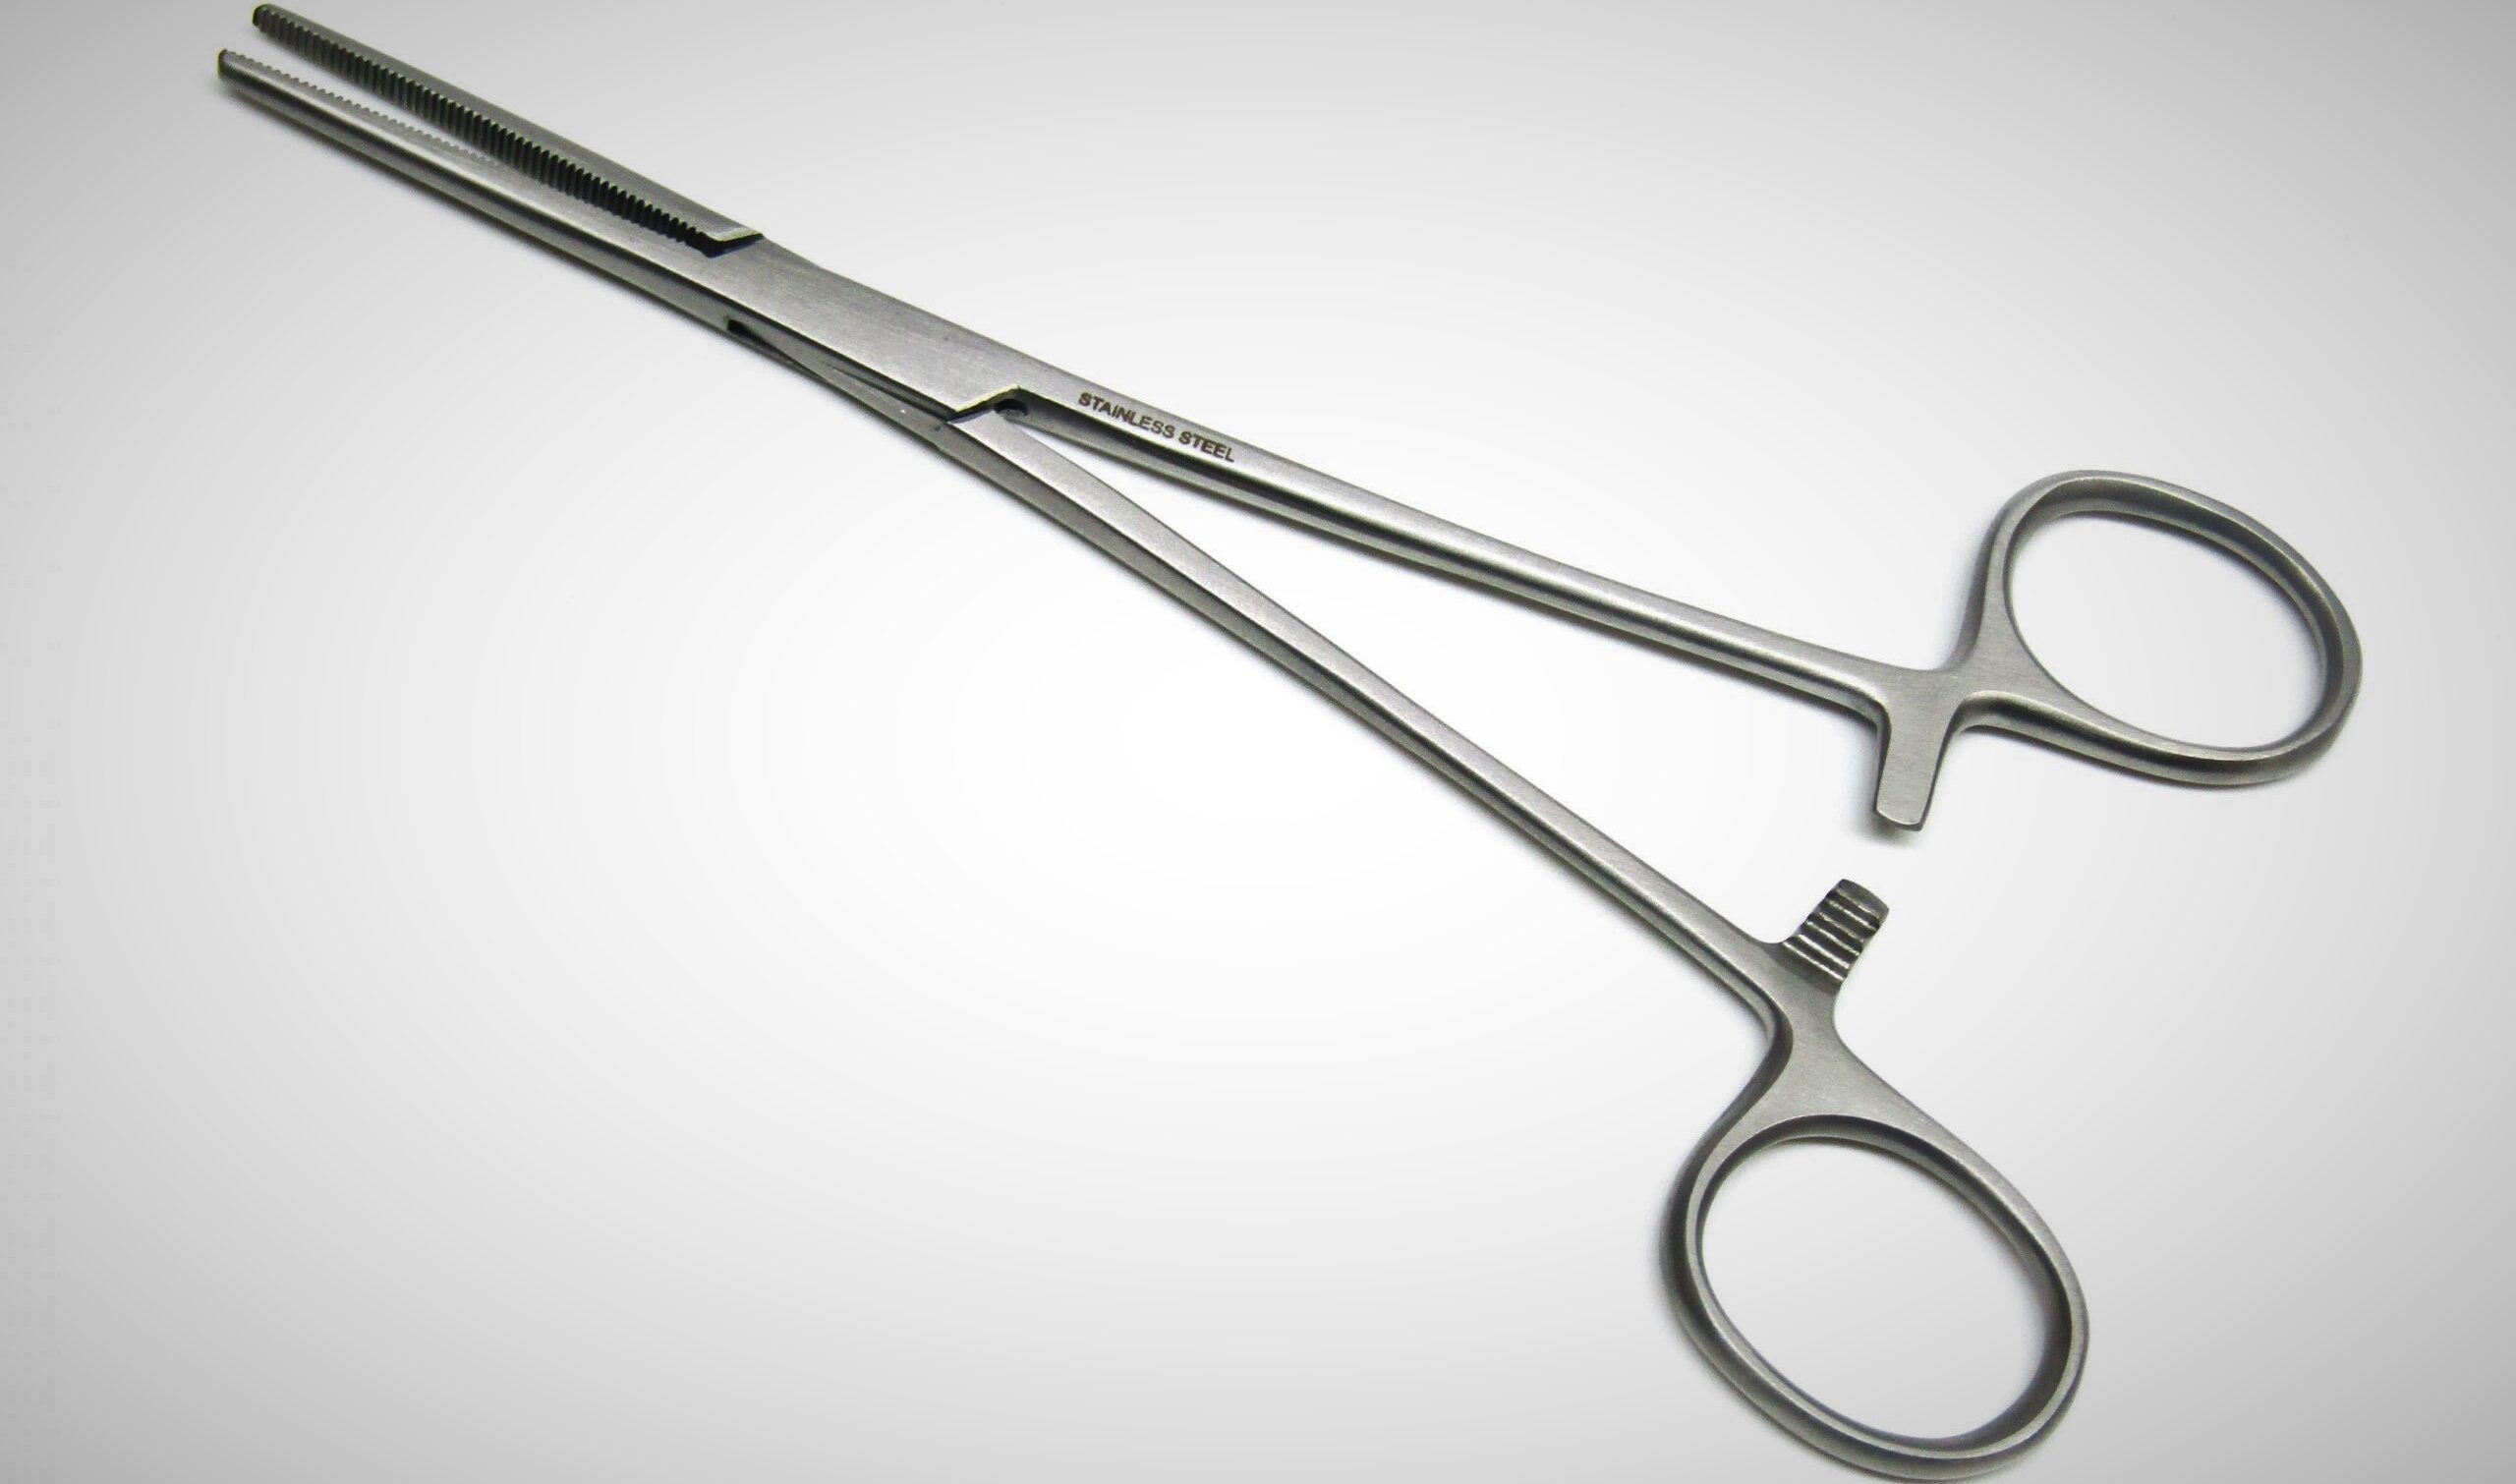 Global Hemostats Market Size, Share, Trends & Growth Analysis Report by 2026